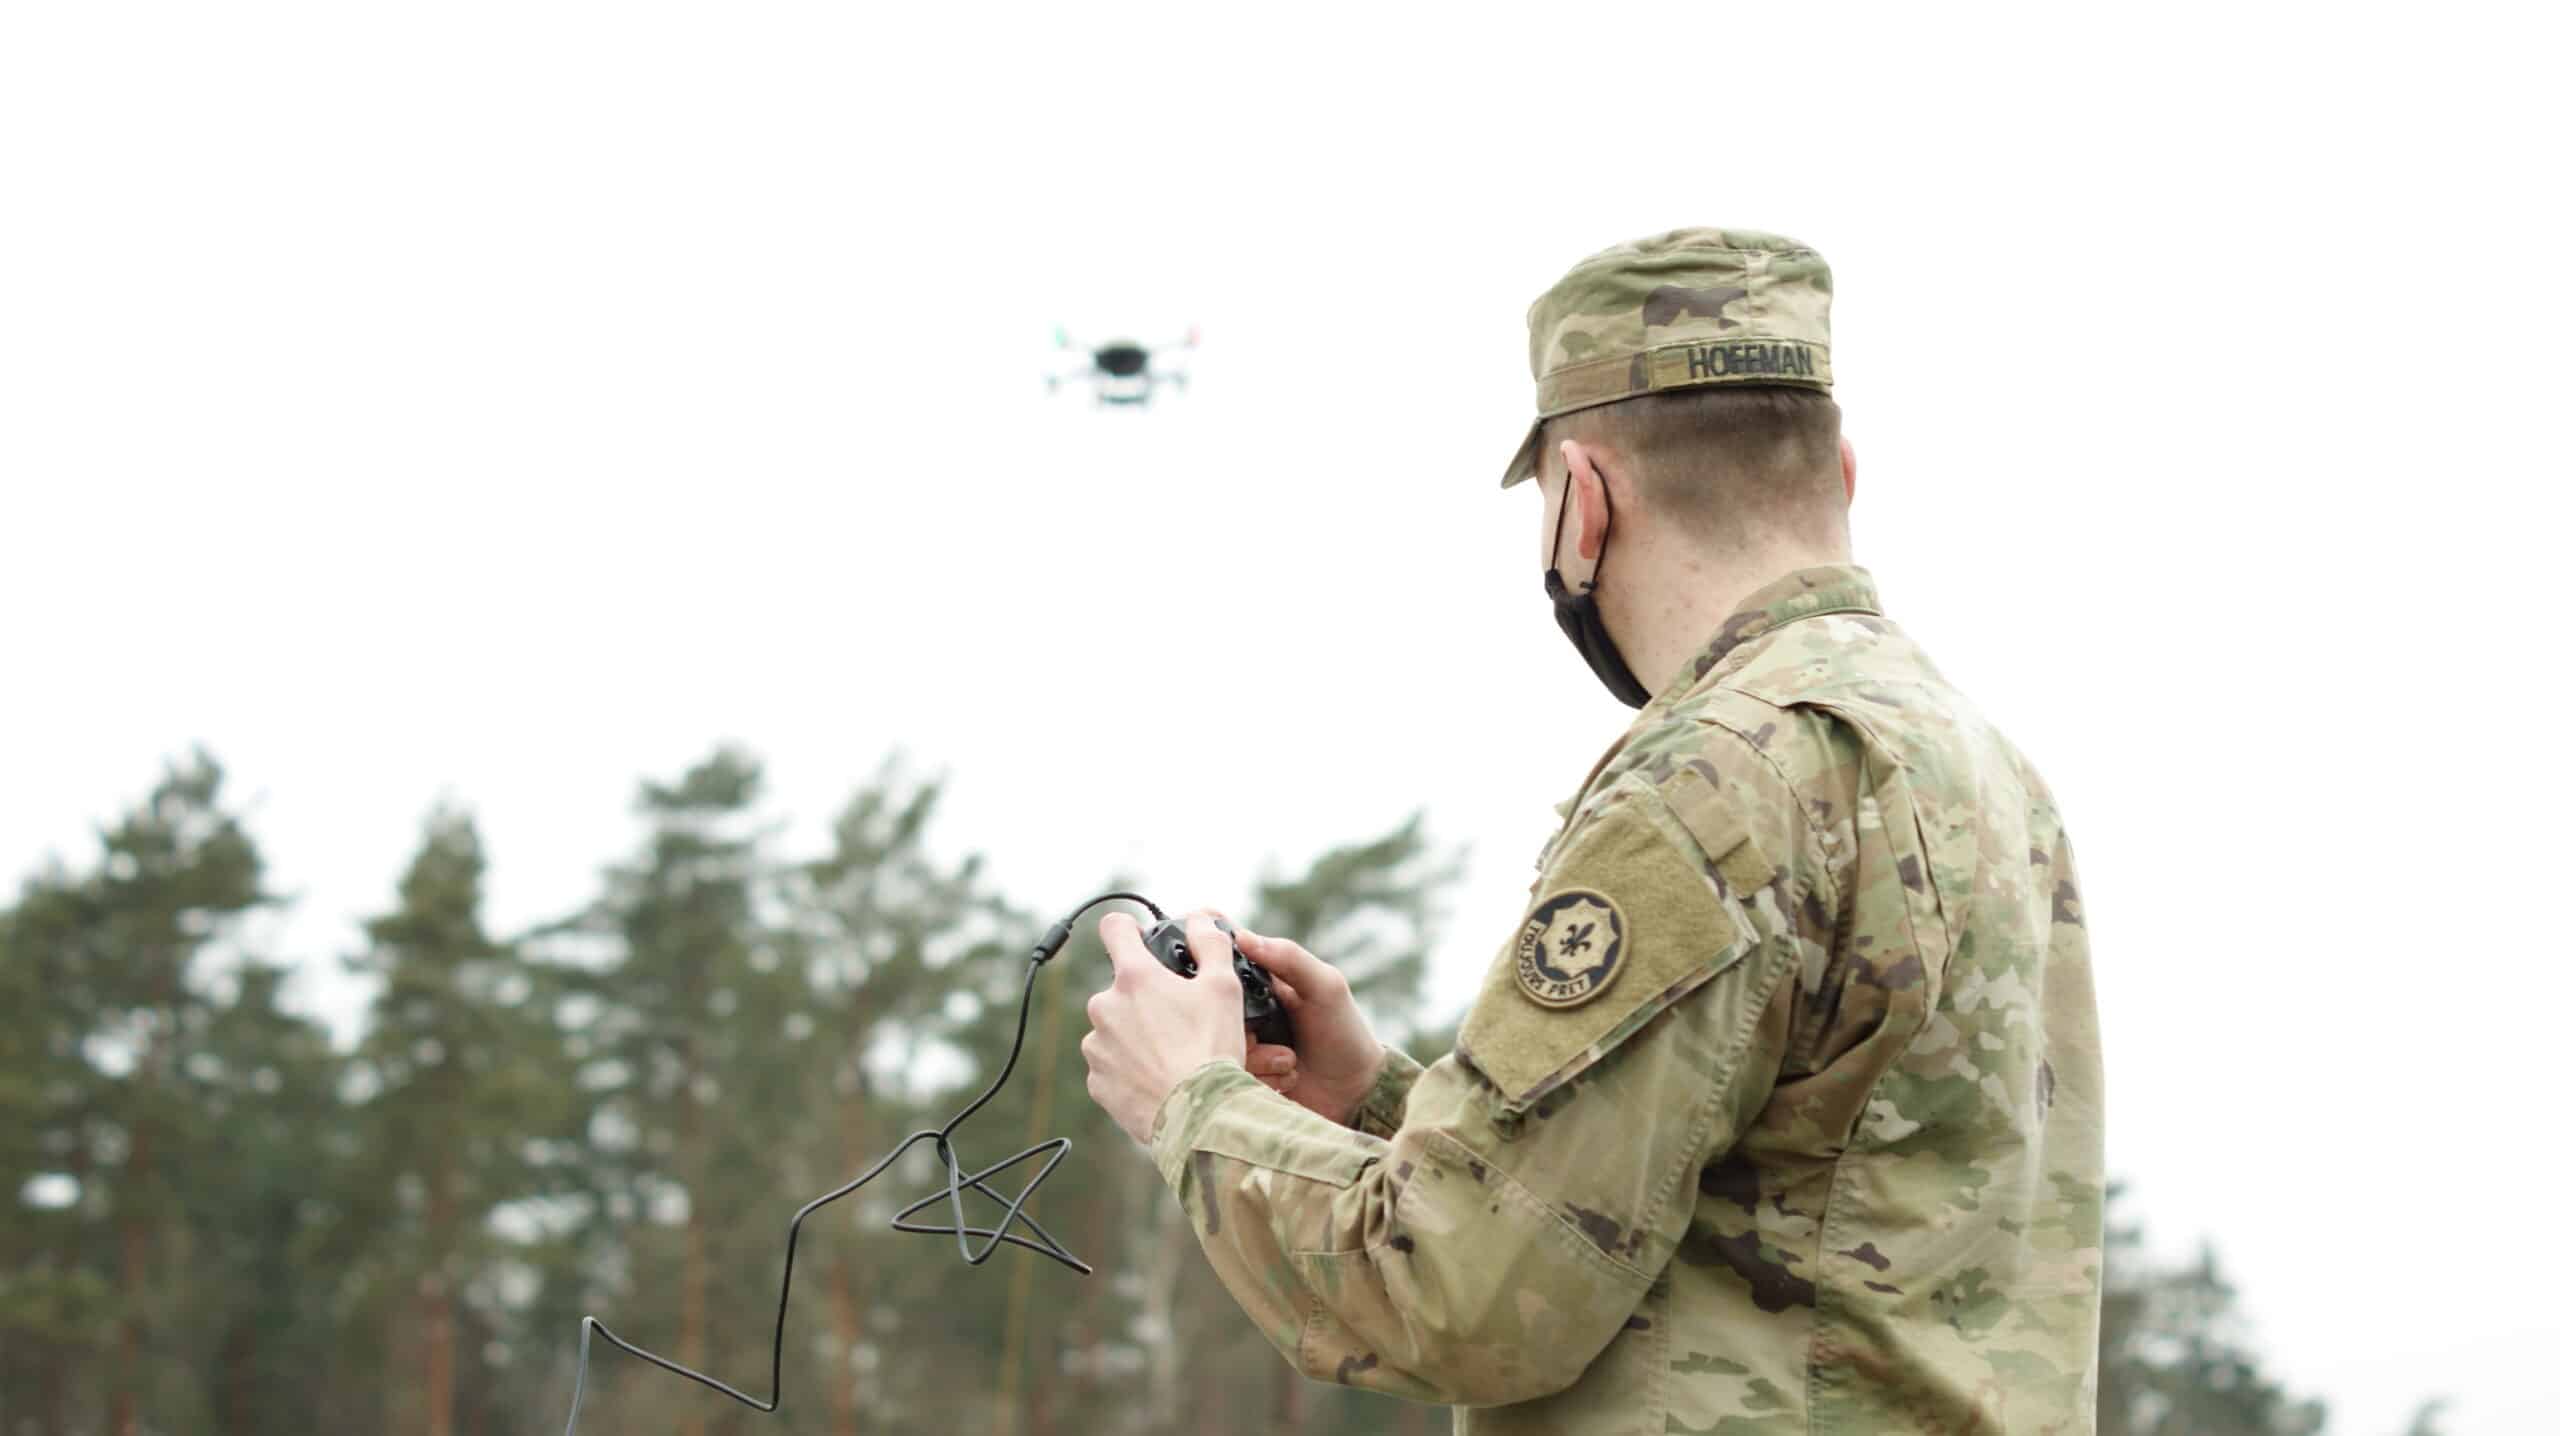 This new UAV, which was fielded to the regiment this year, increases communication capabilities and improves security for units.